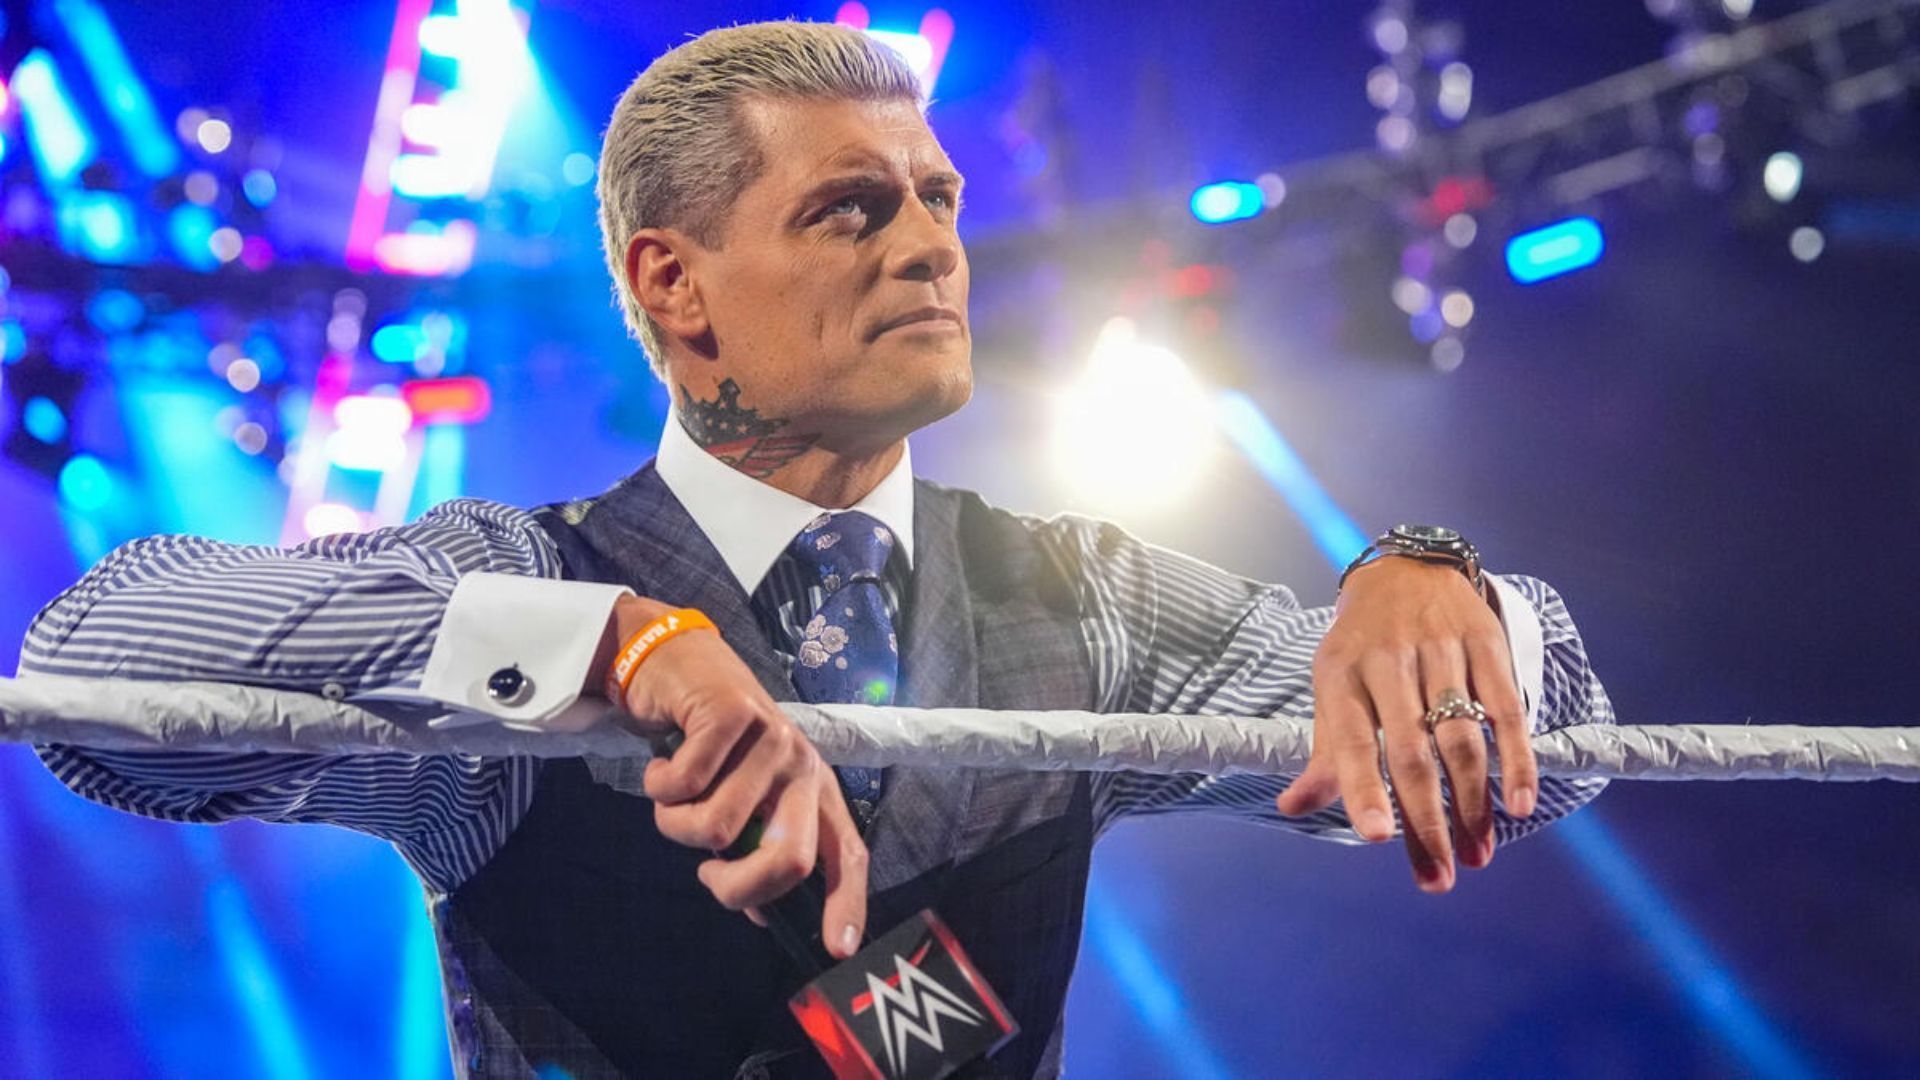 Cody Rhodes returned to WWE in 2022 (Credit: WWE)